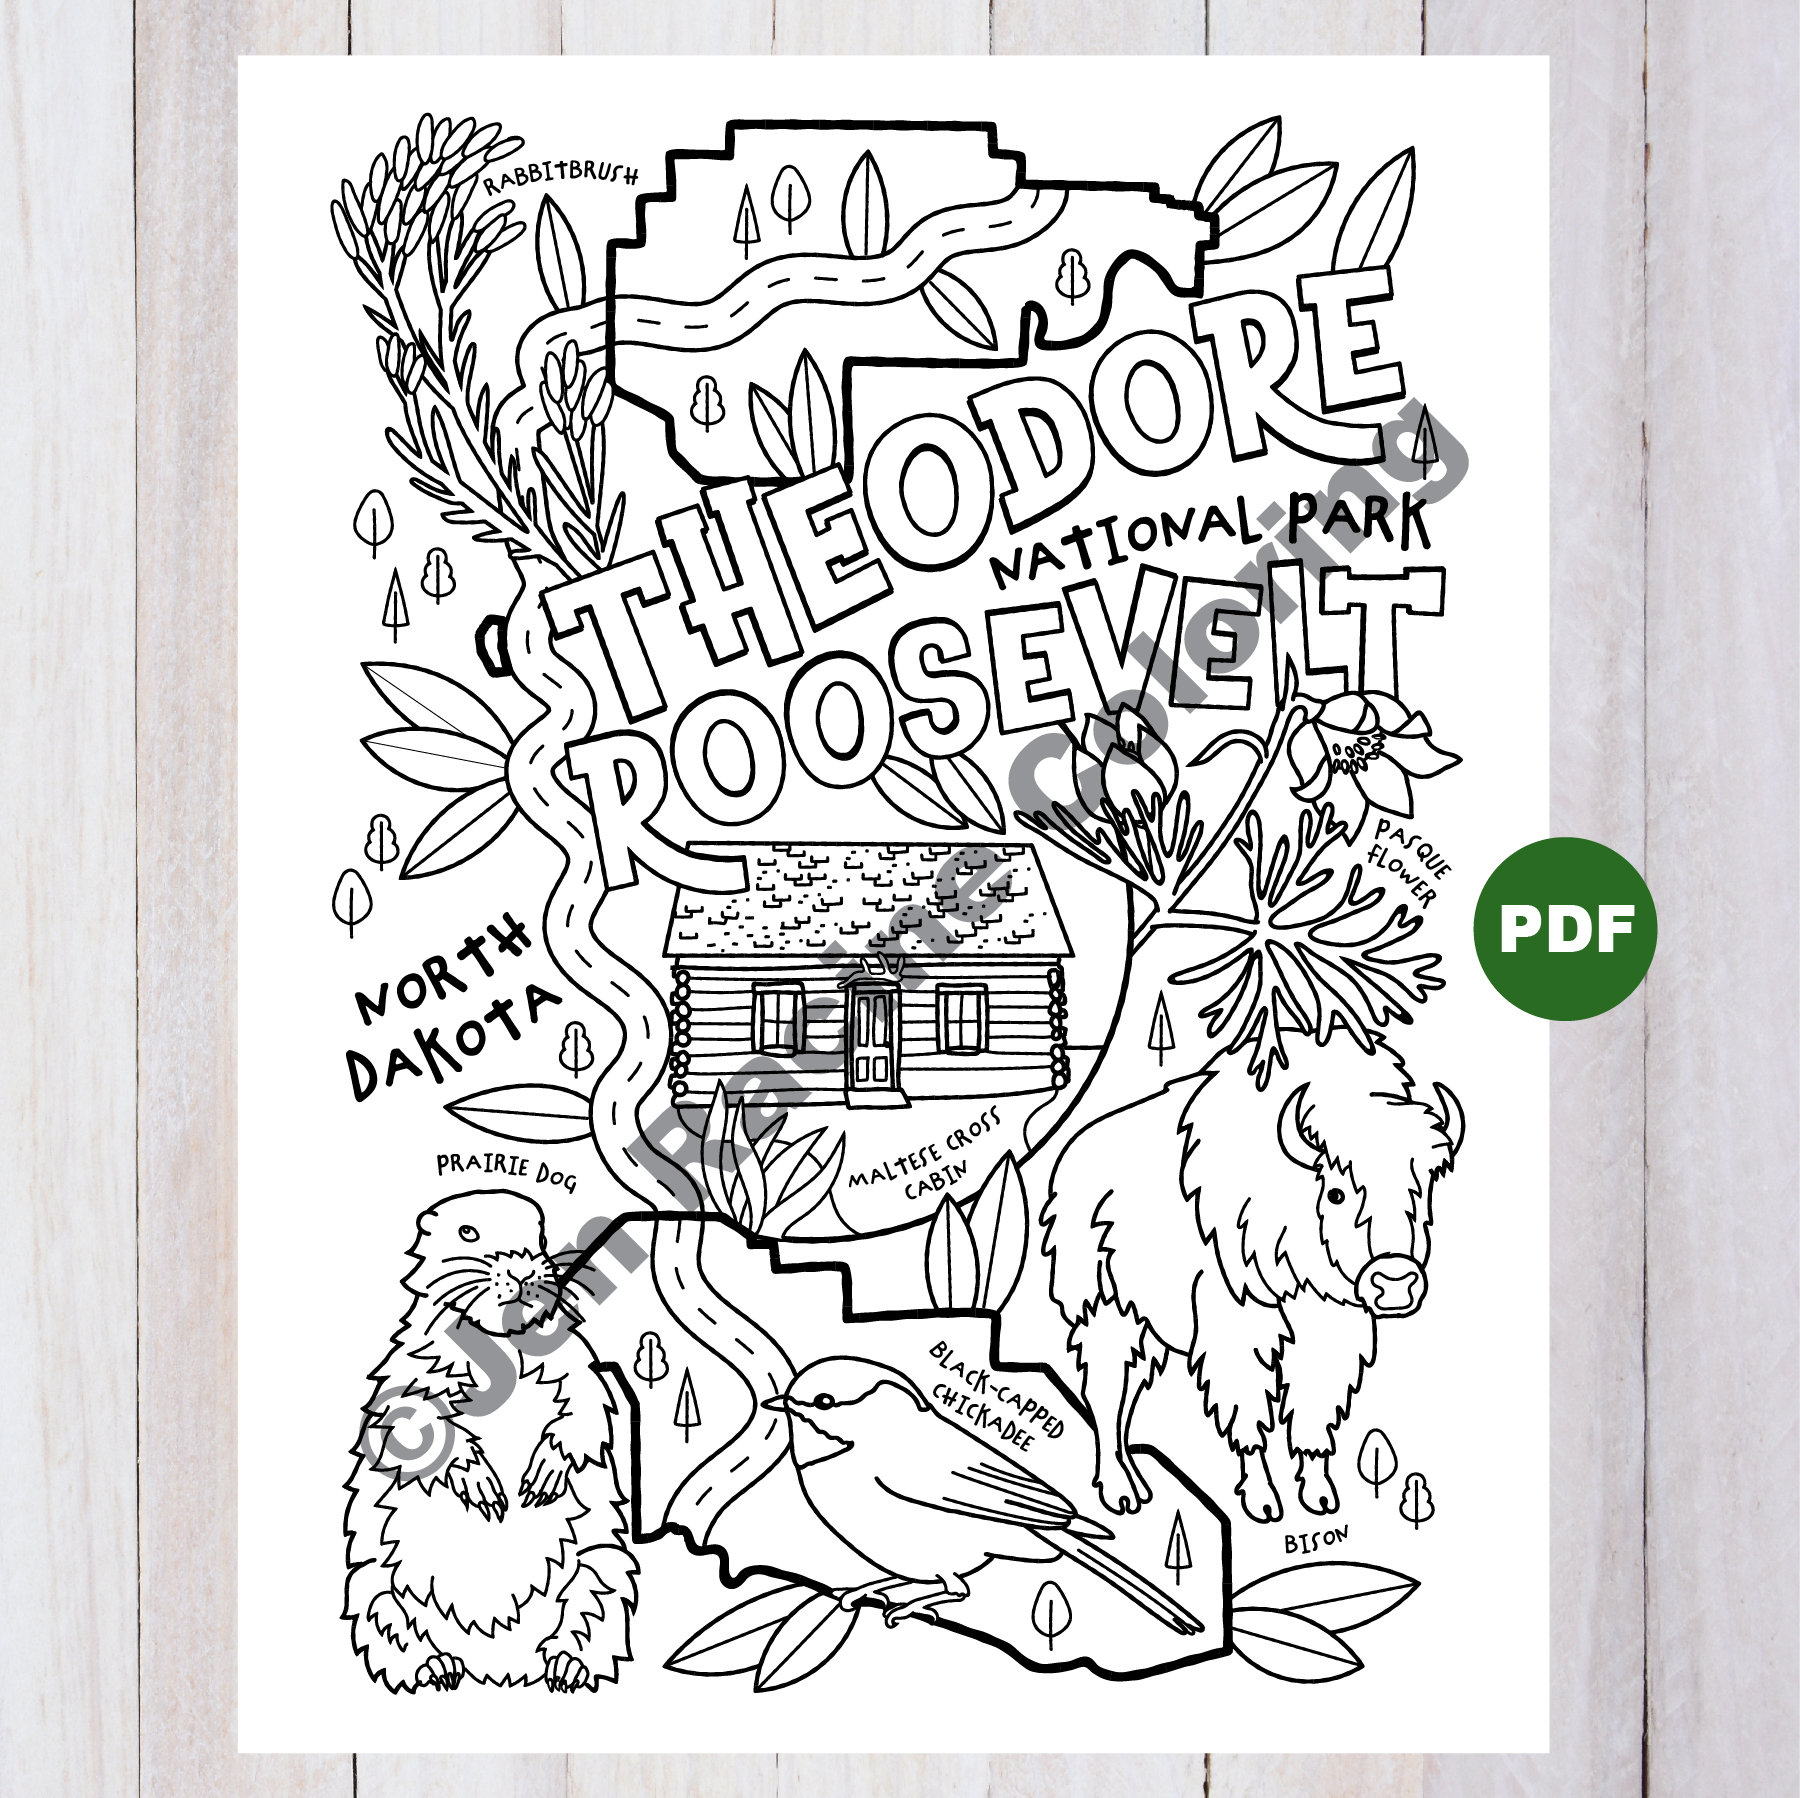 Theodore roosevelt national park coloring page